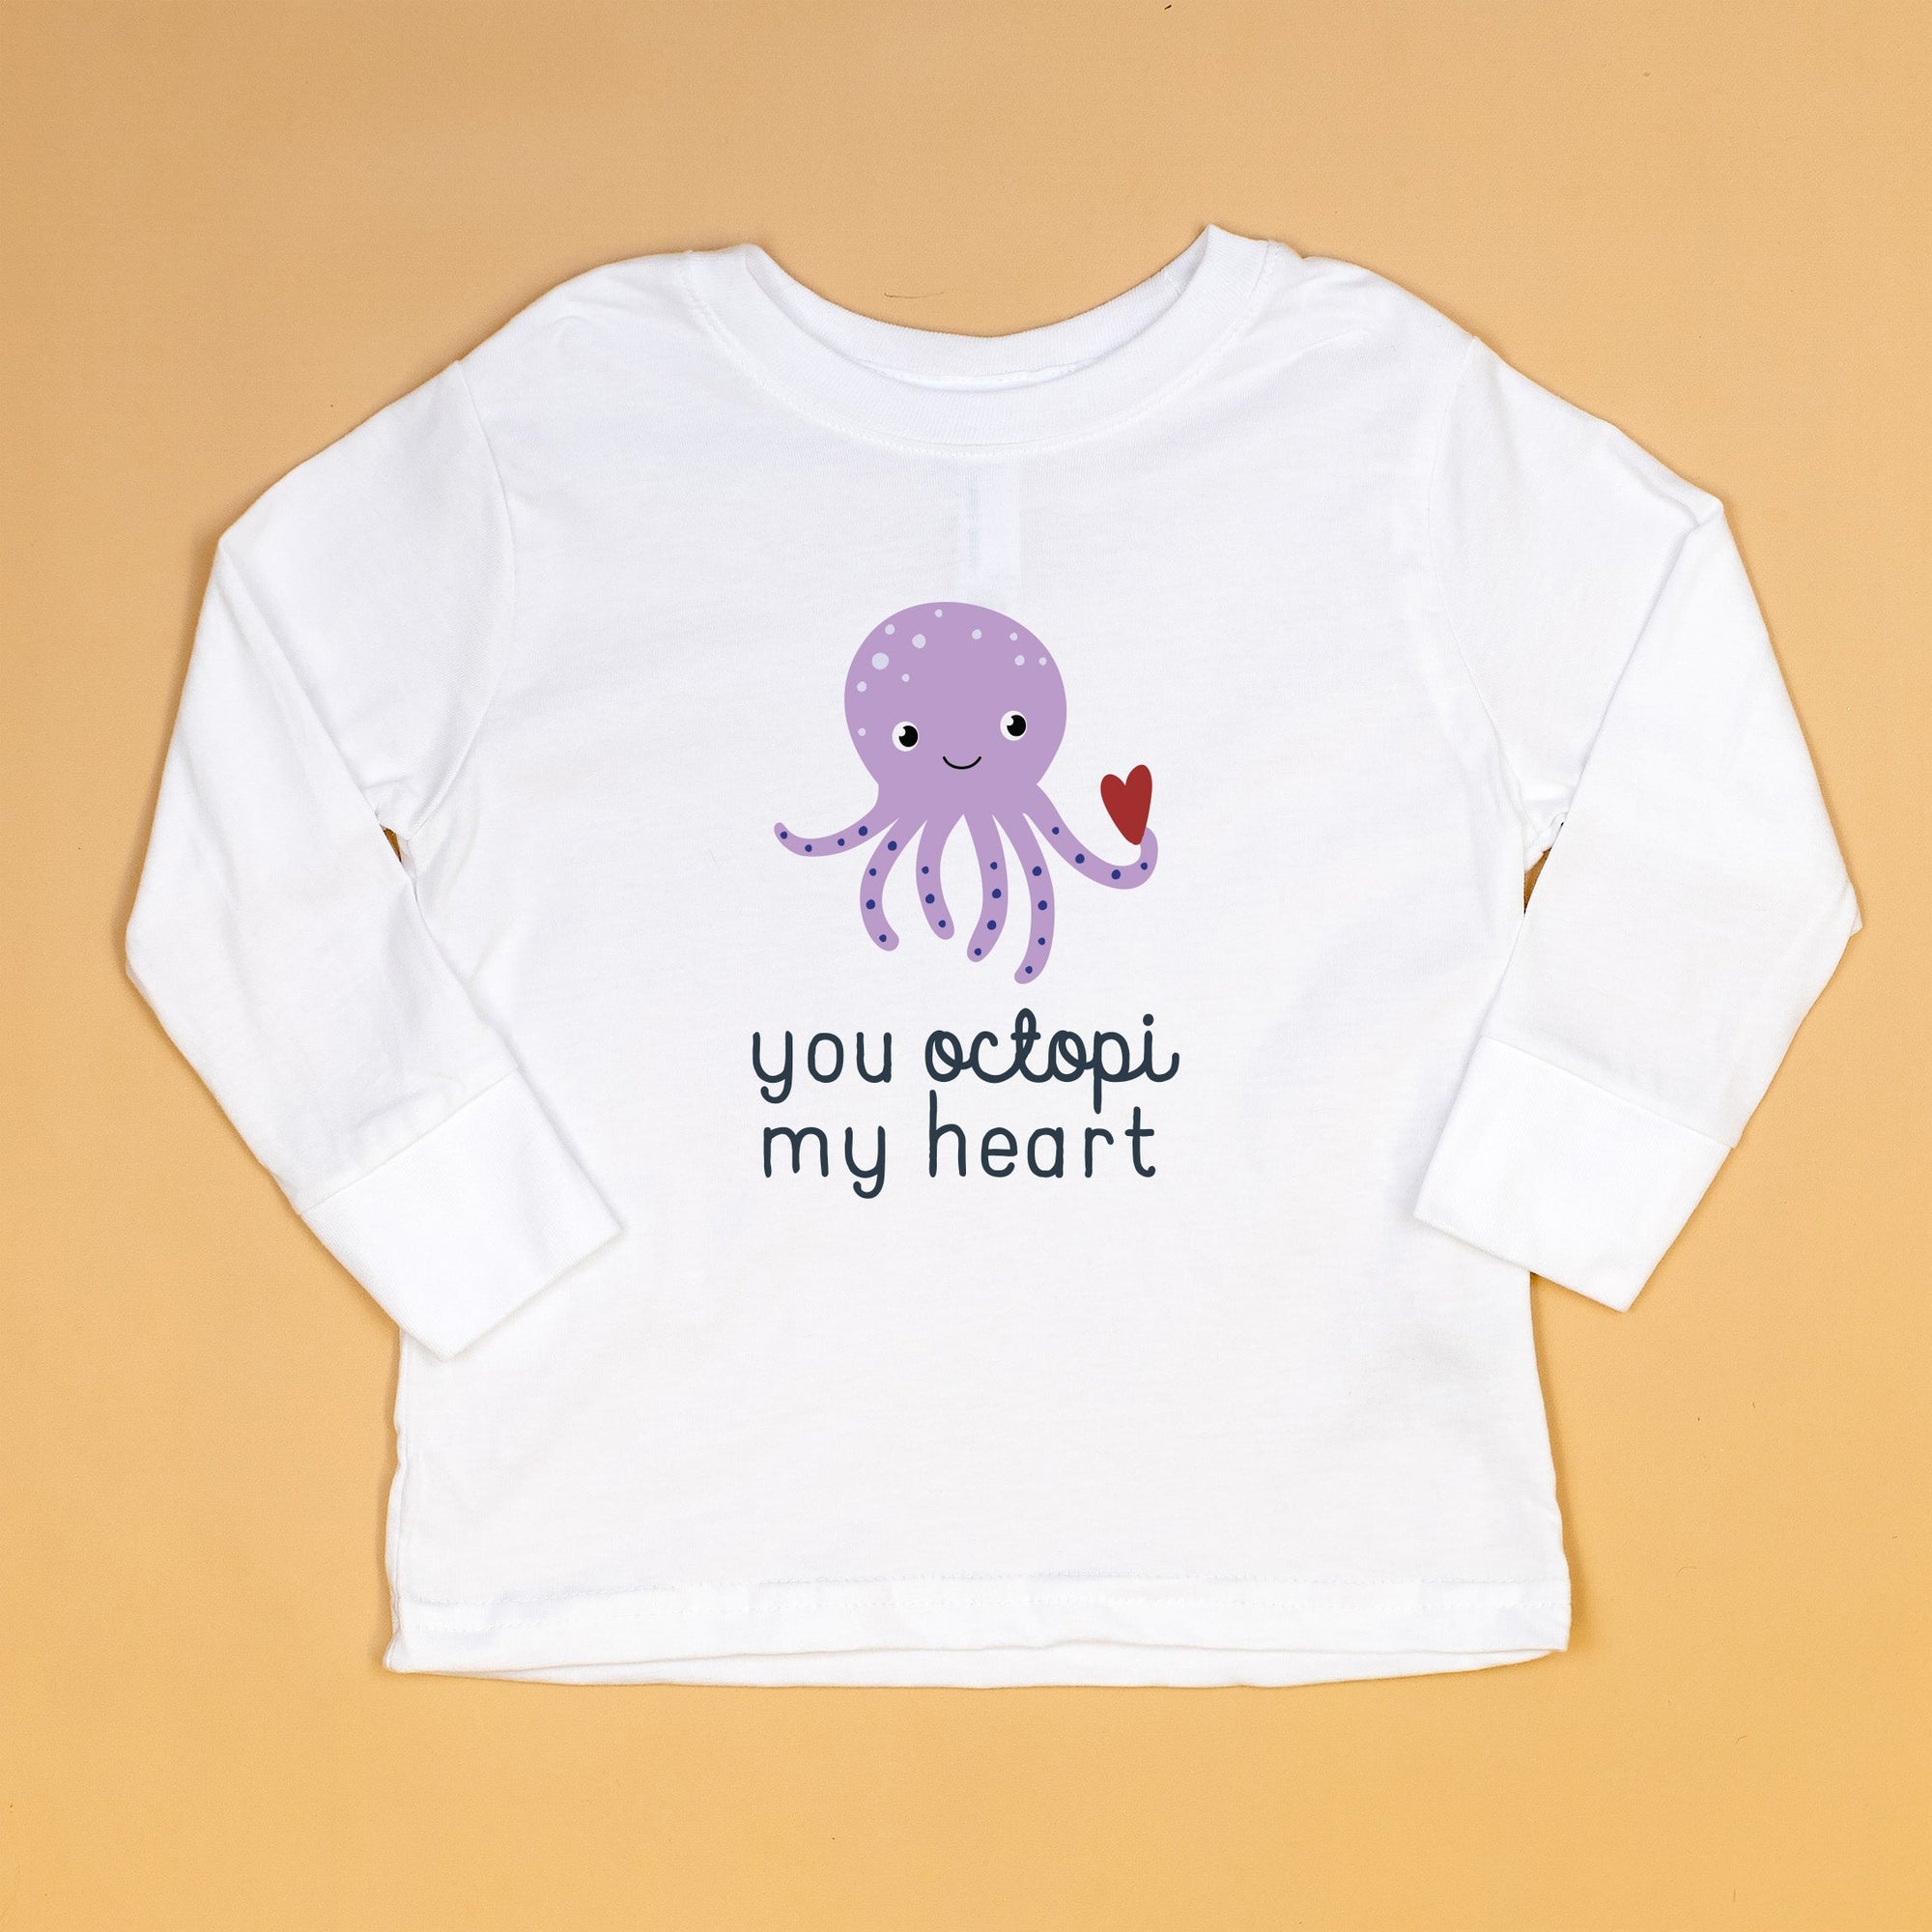 Cuddle Sleep Dream Baby & Toddler Tops You Octopi My Heart | White Tshirt